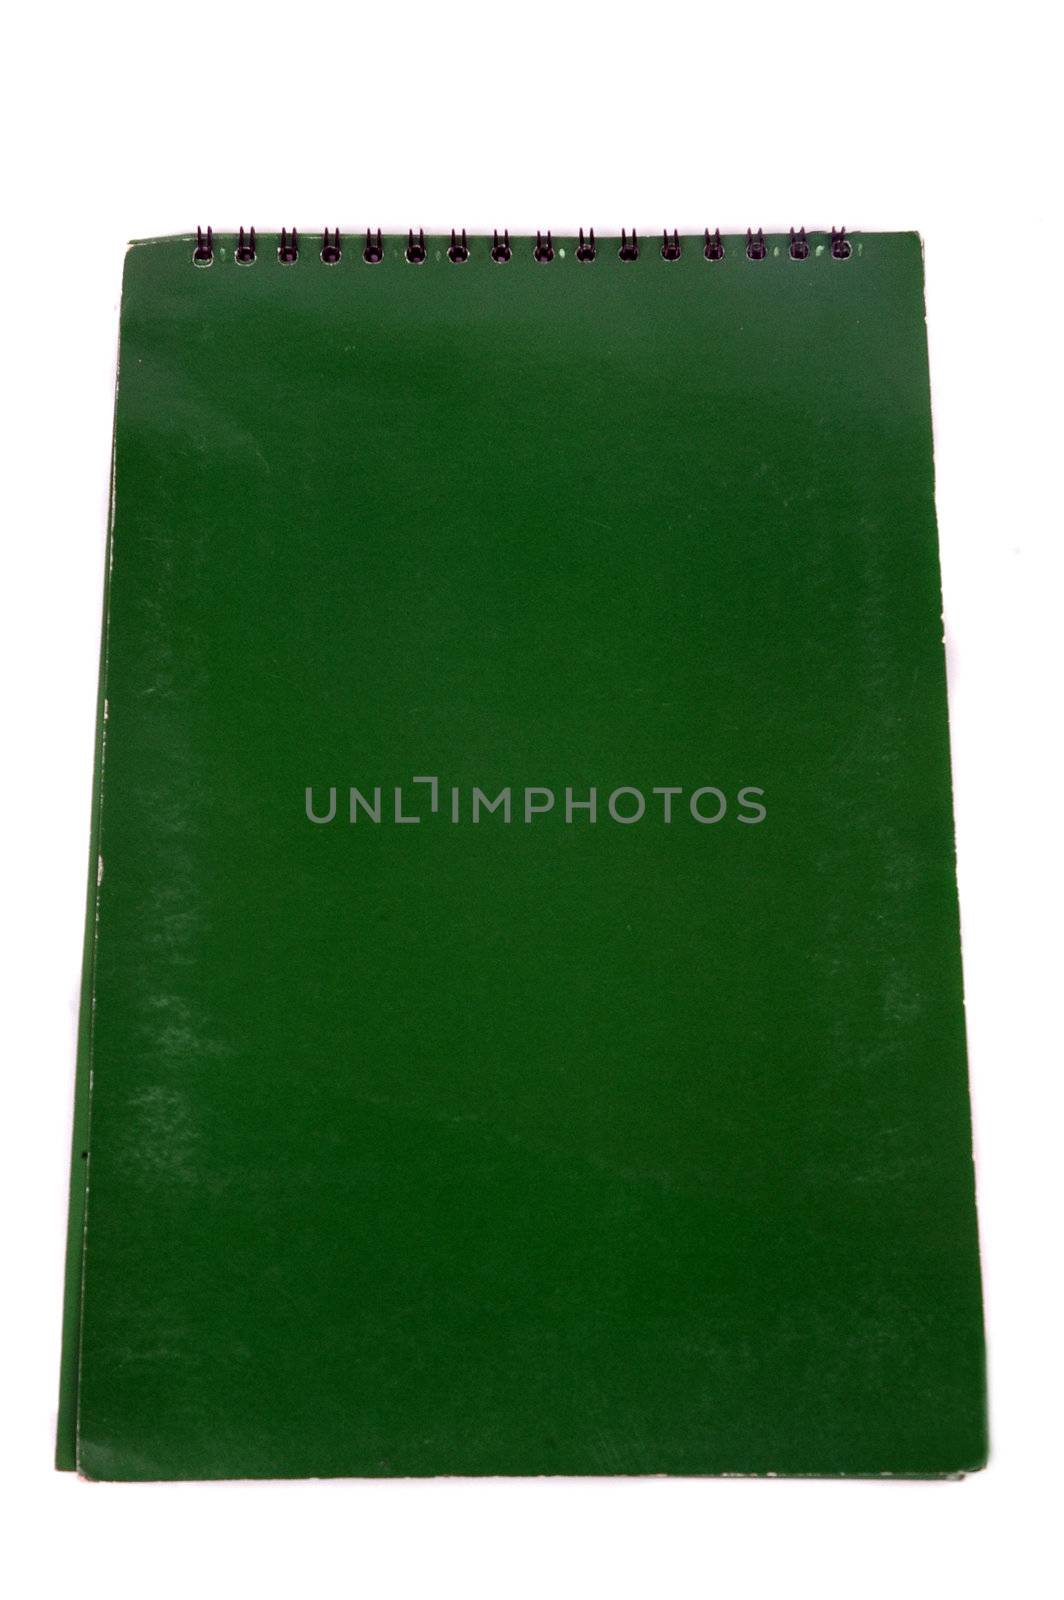 green  floral cover of book vertical isolated on white background